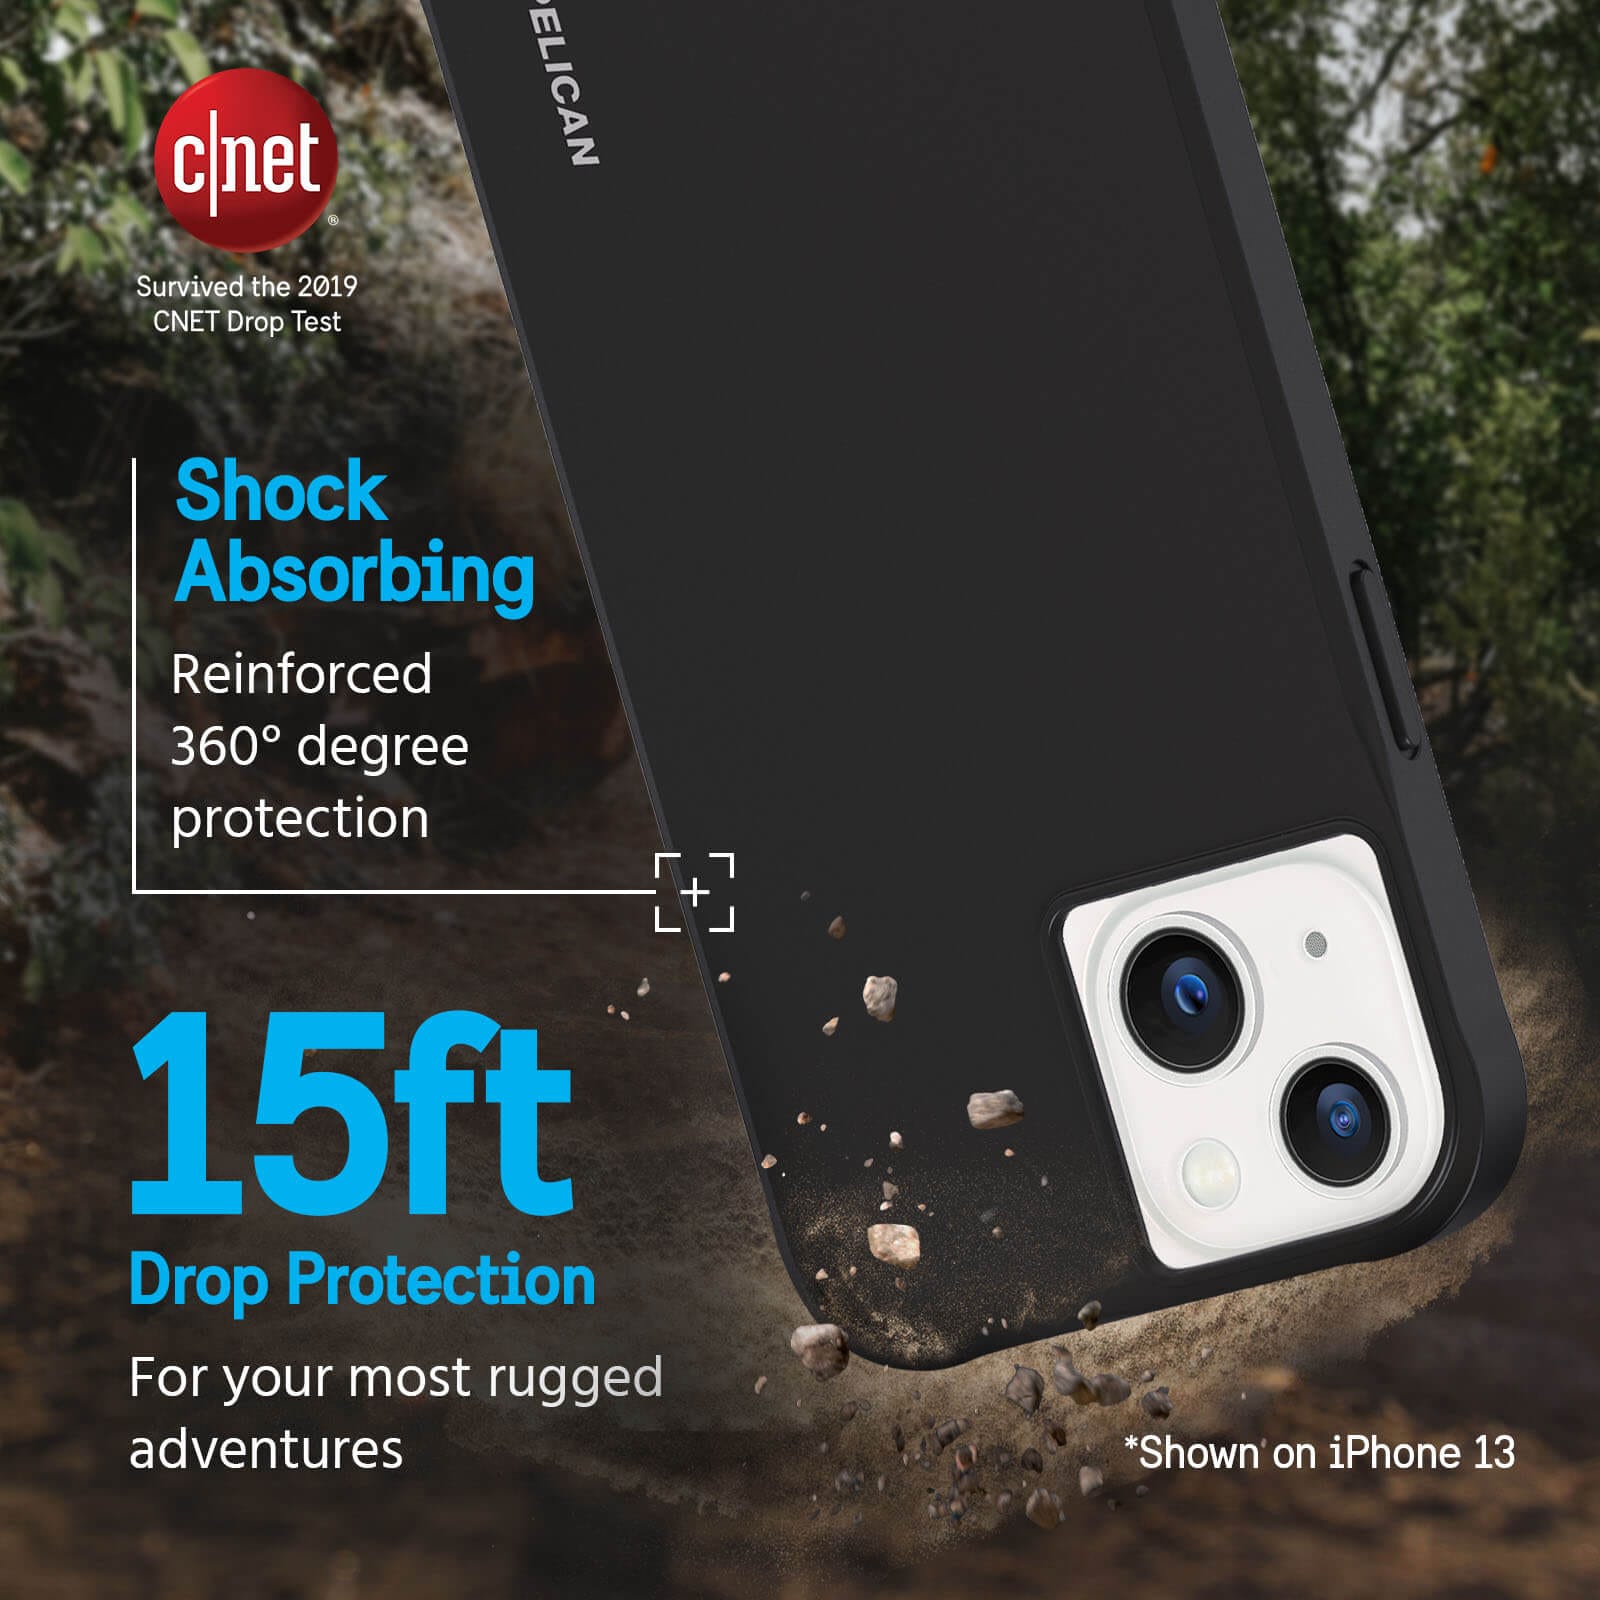 Survived the 2019 CNET Drop Test. Shock Absorbing Reinforced 360 degree protection. 15ft Drop Protection for your mot rugged adventures. color::Black